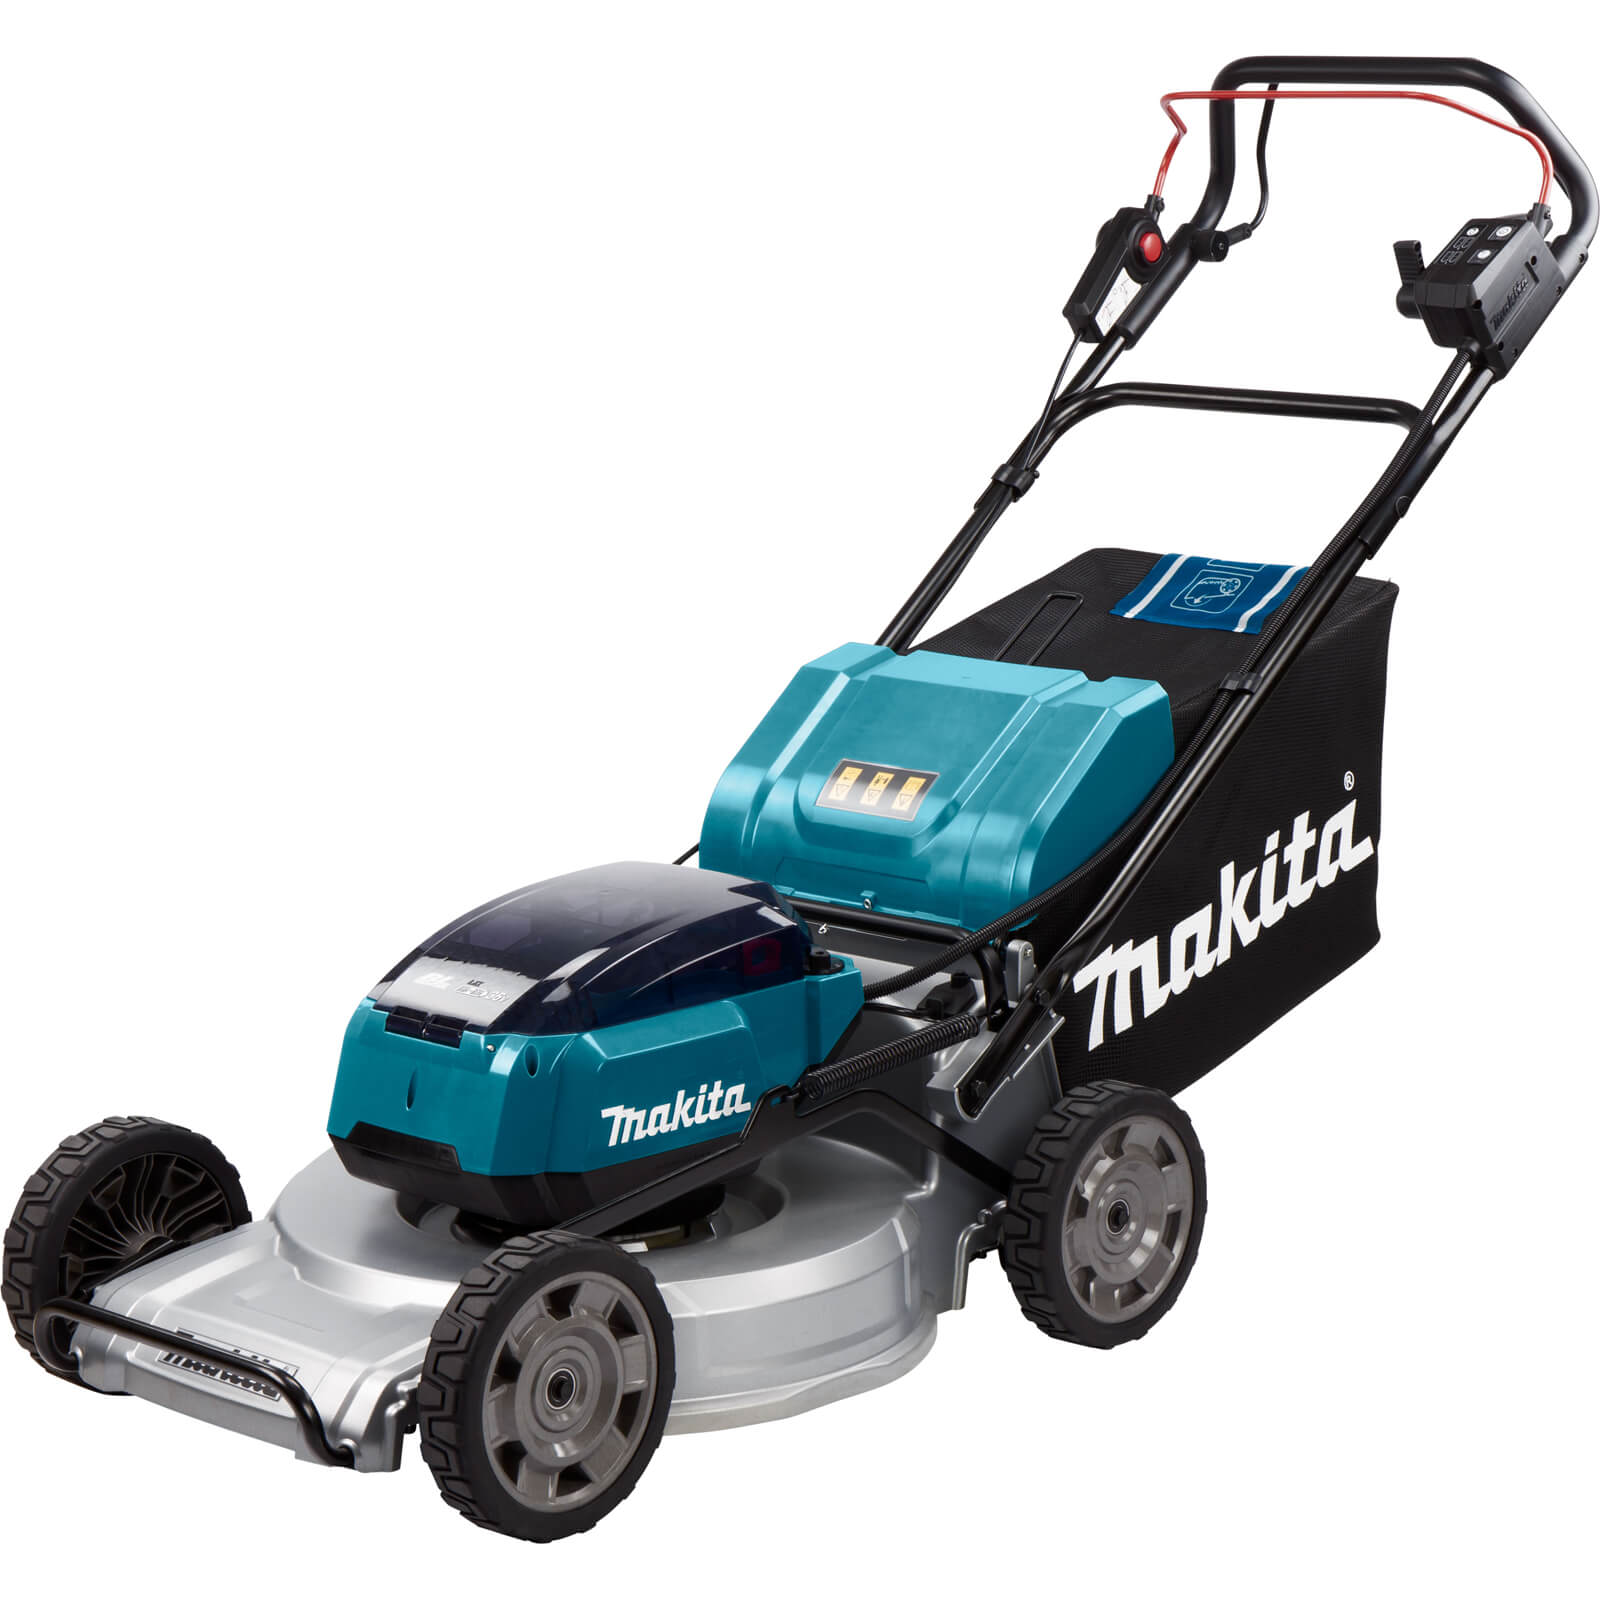 Image of Makita DLM533 Twin 18v LXT Cordless Brushless Lawnmower 530mm No Batteries No Charger